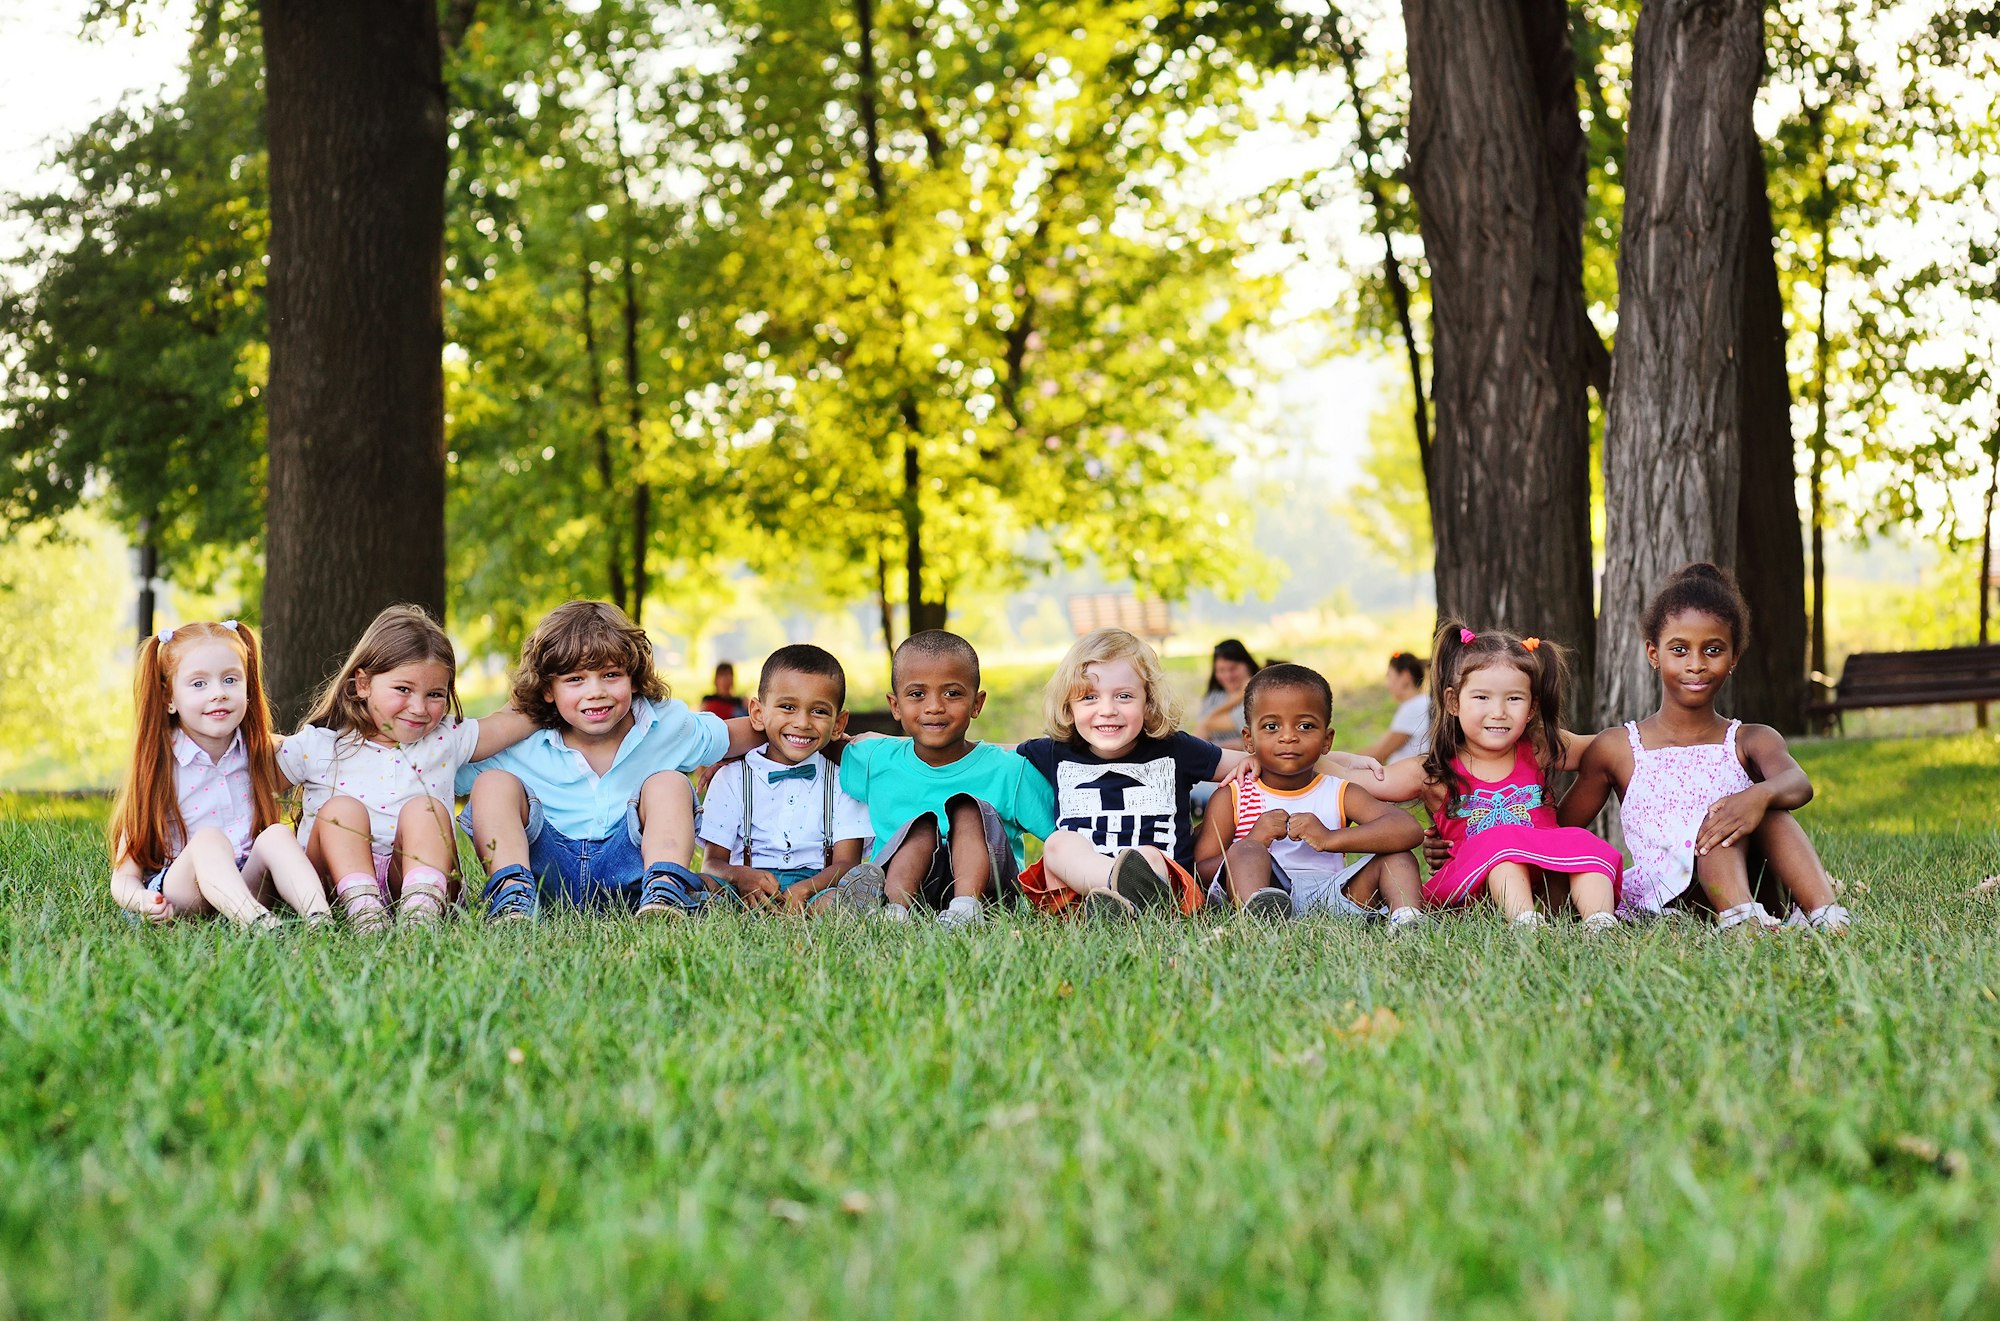 many young children of different races play together in the Park on the green fresh grass.